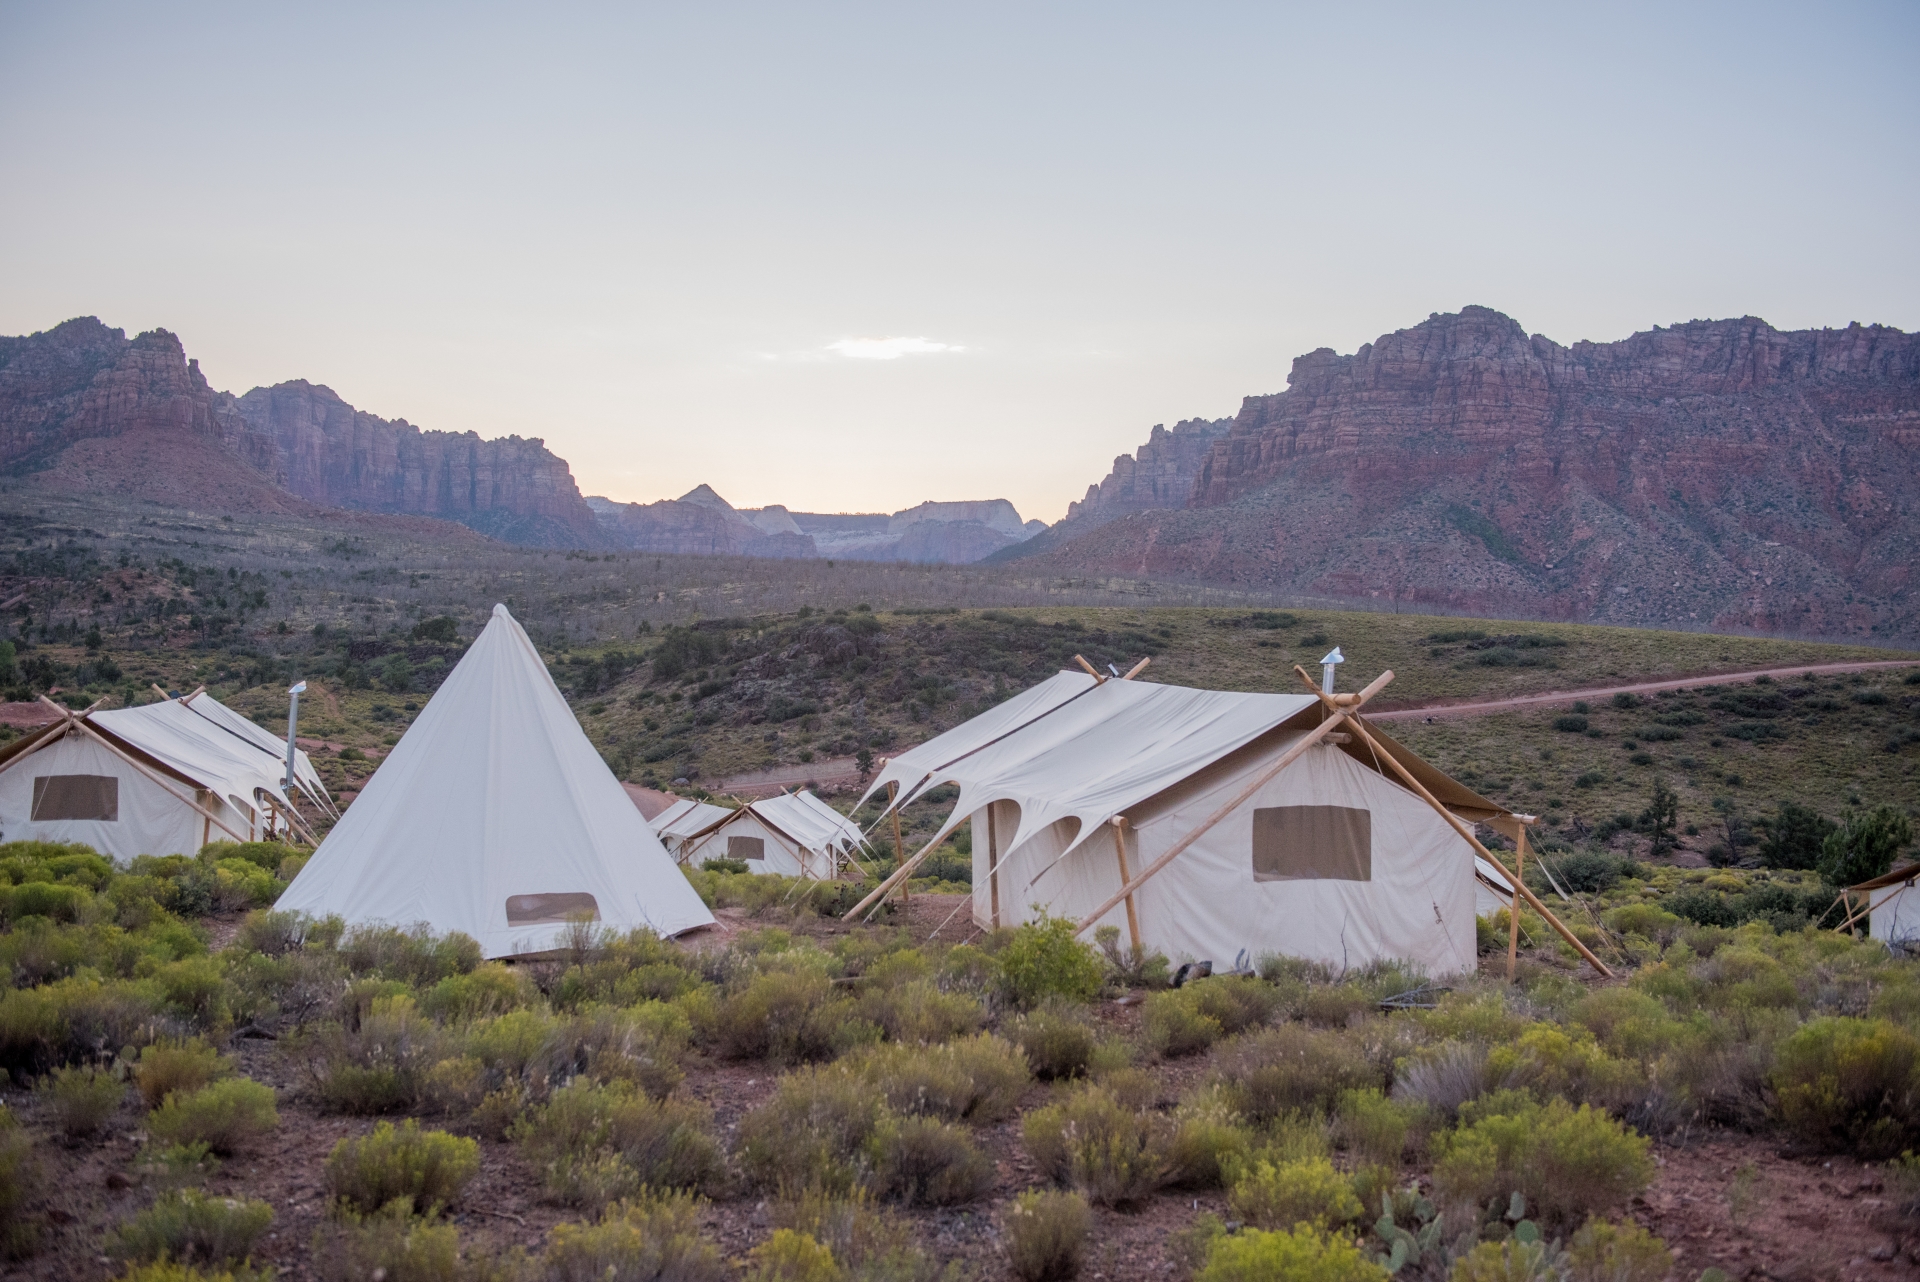 Sleep amidst nature - Zion National Park Glamping